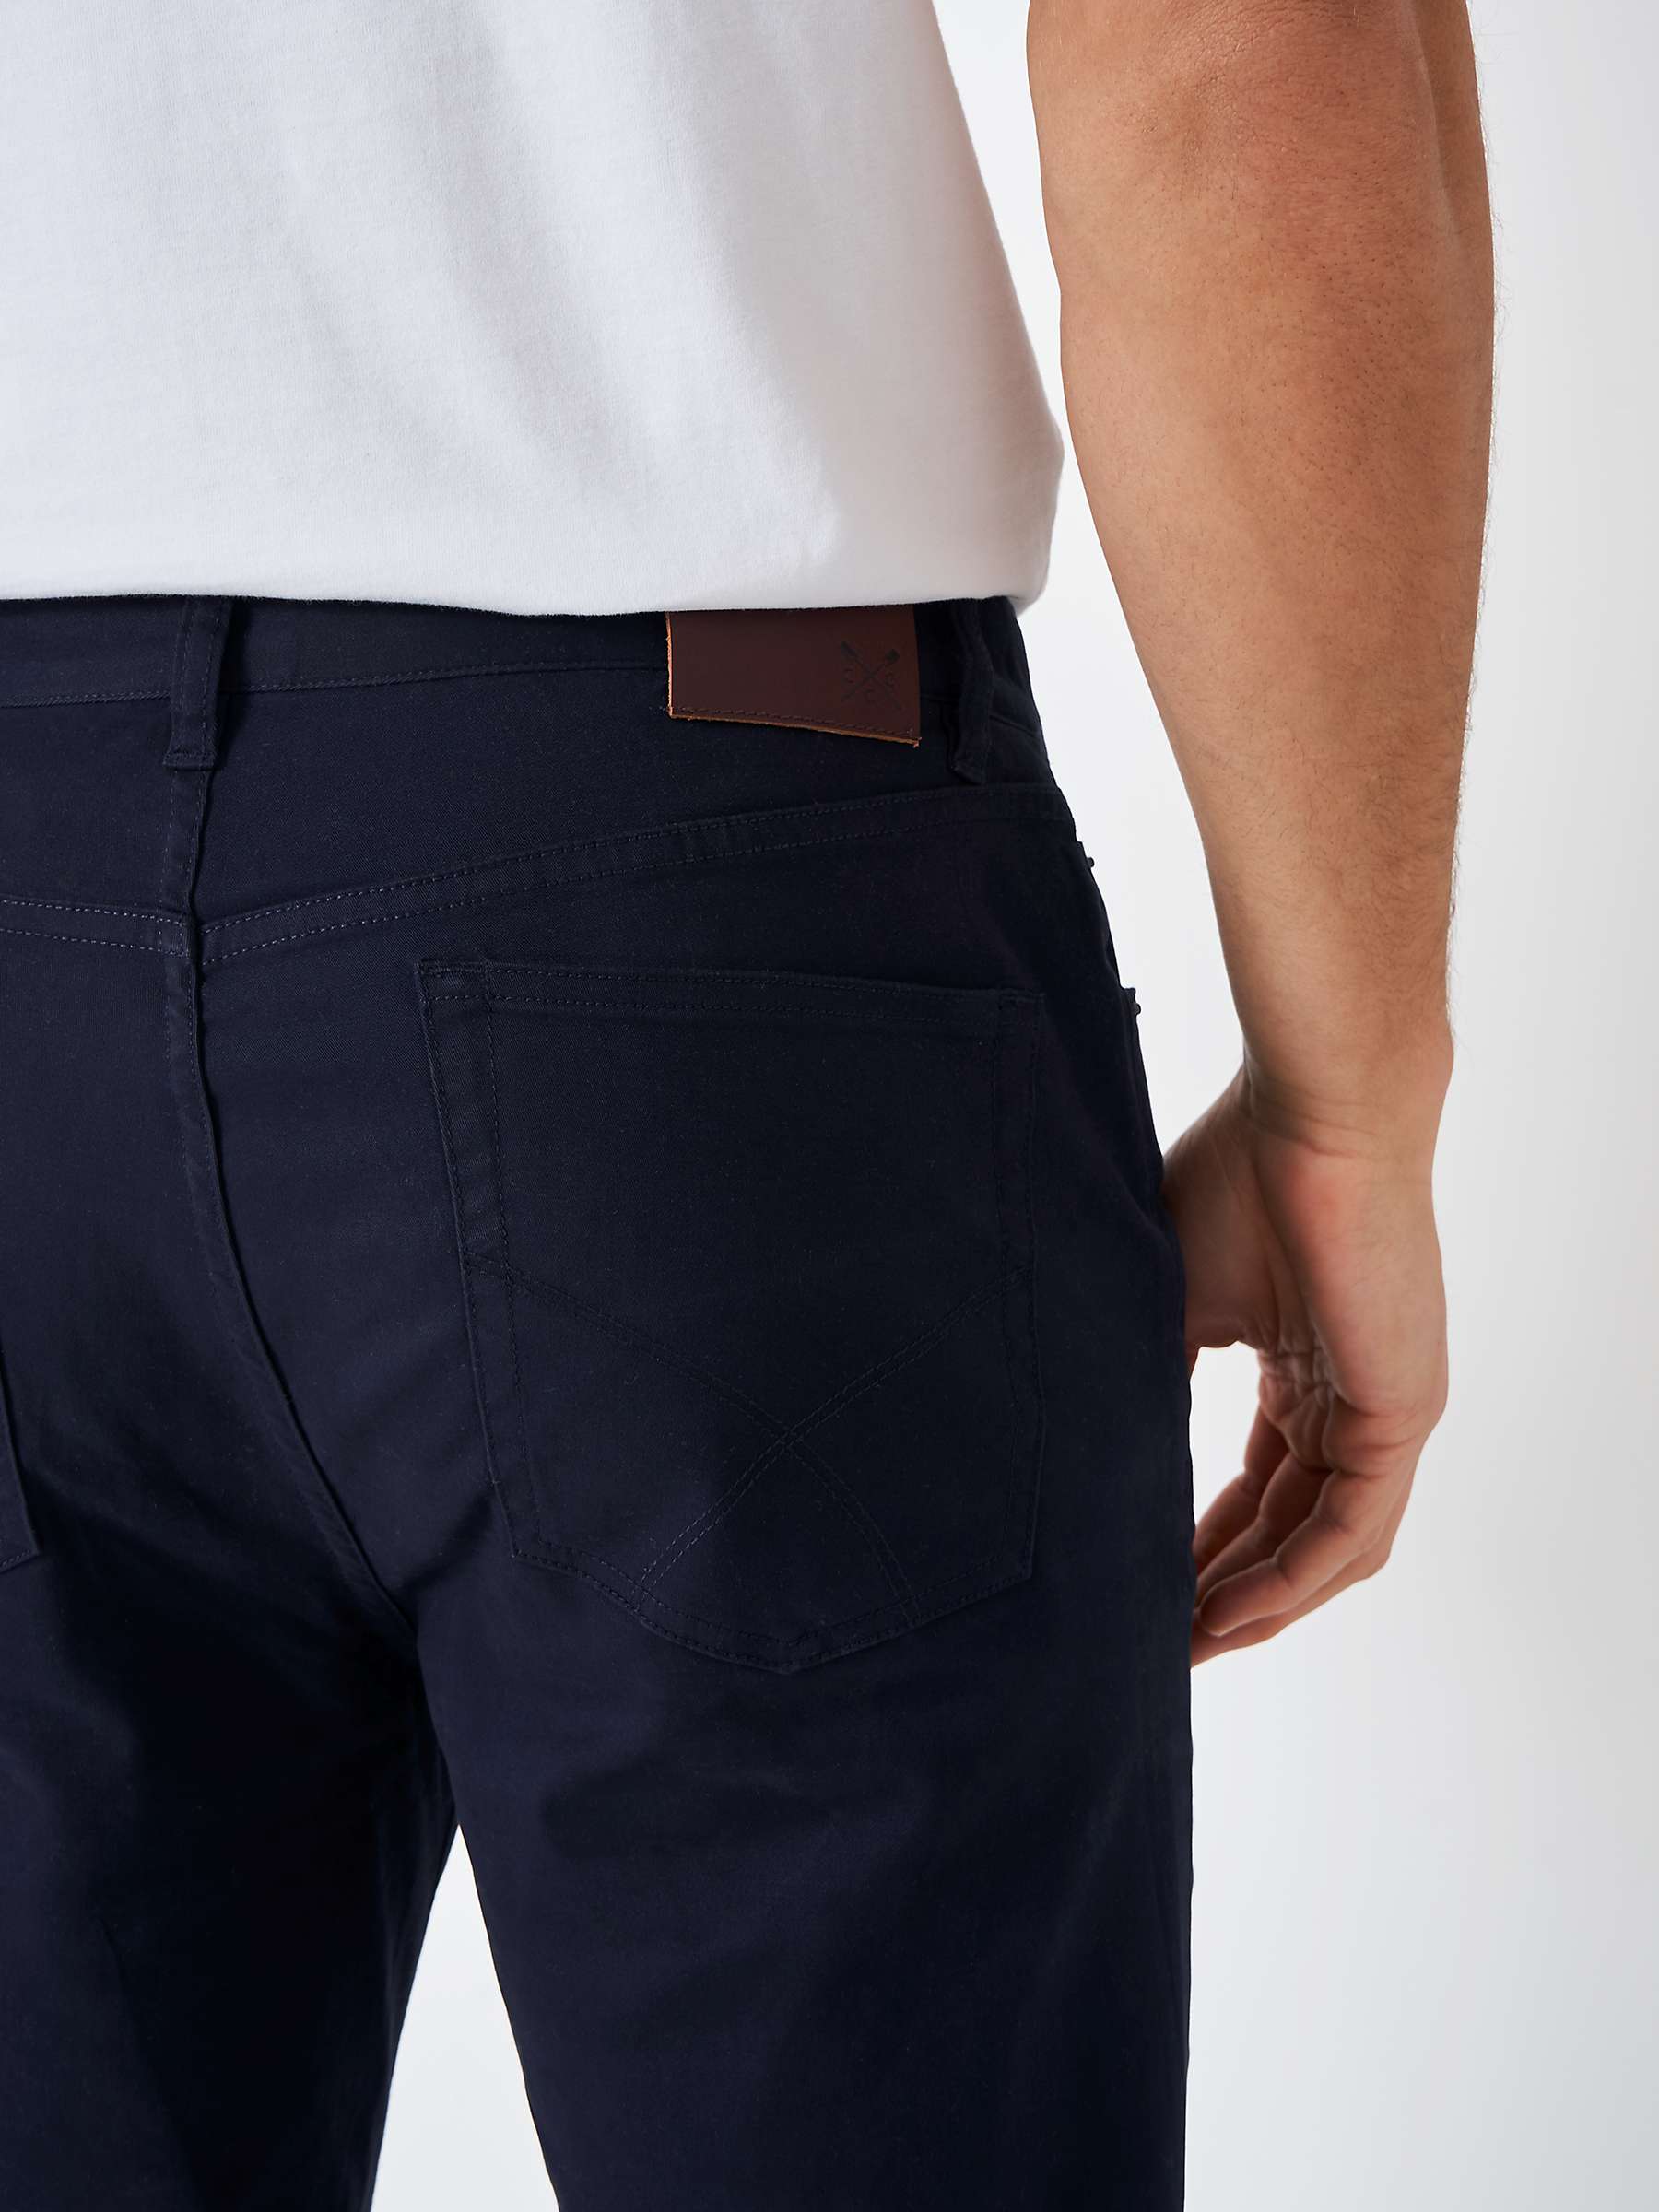 Buy Crew Clothing Spencer Slim Fit Trousers, Navy Online at johnlewis.com